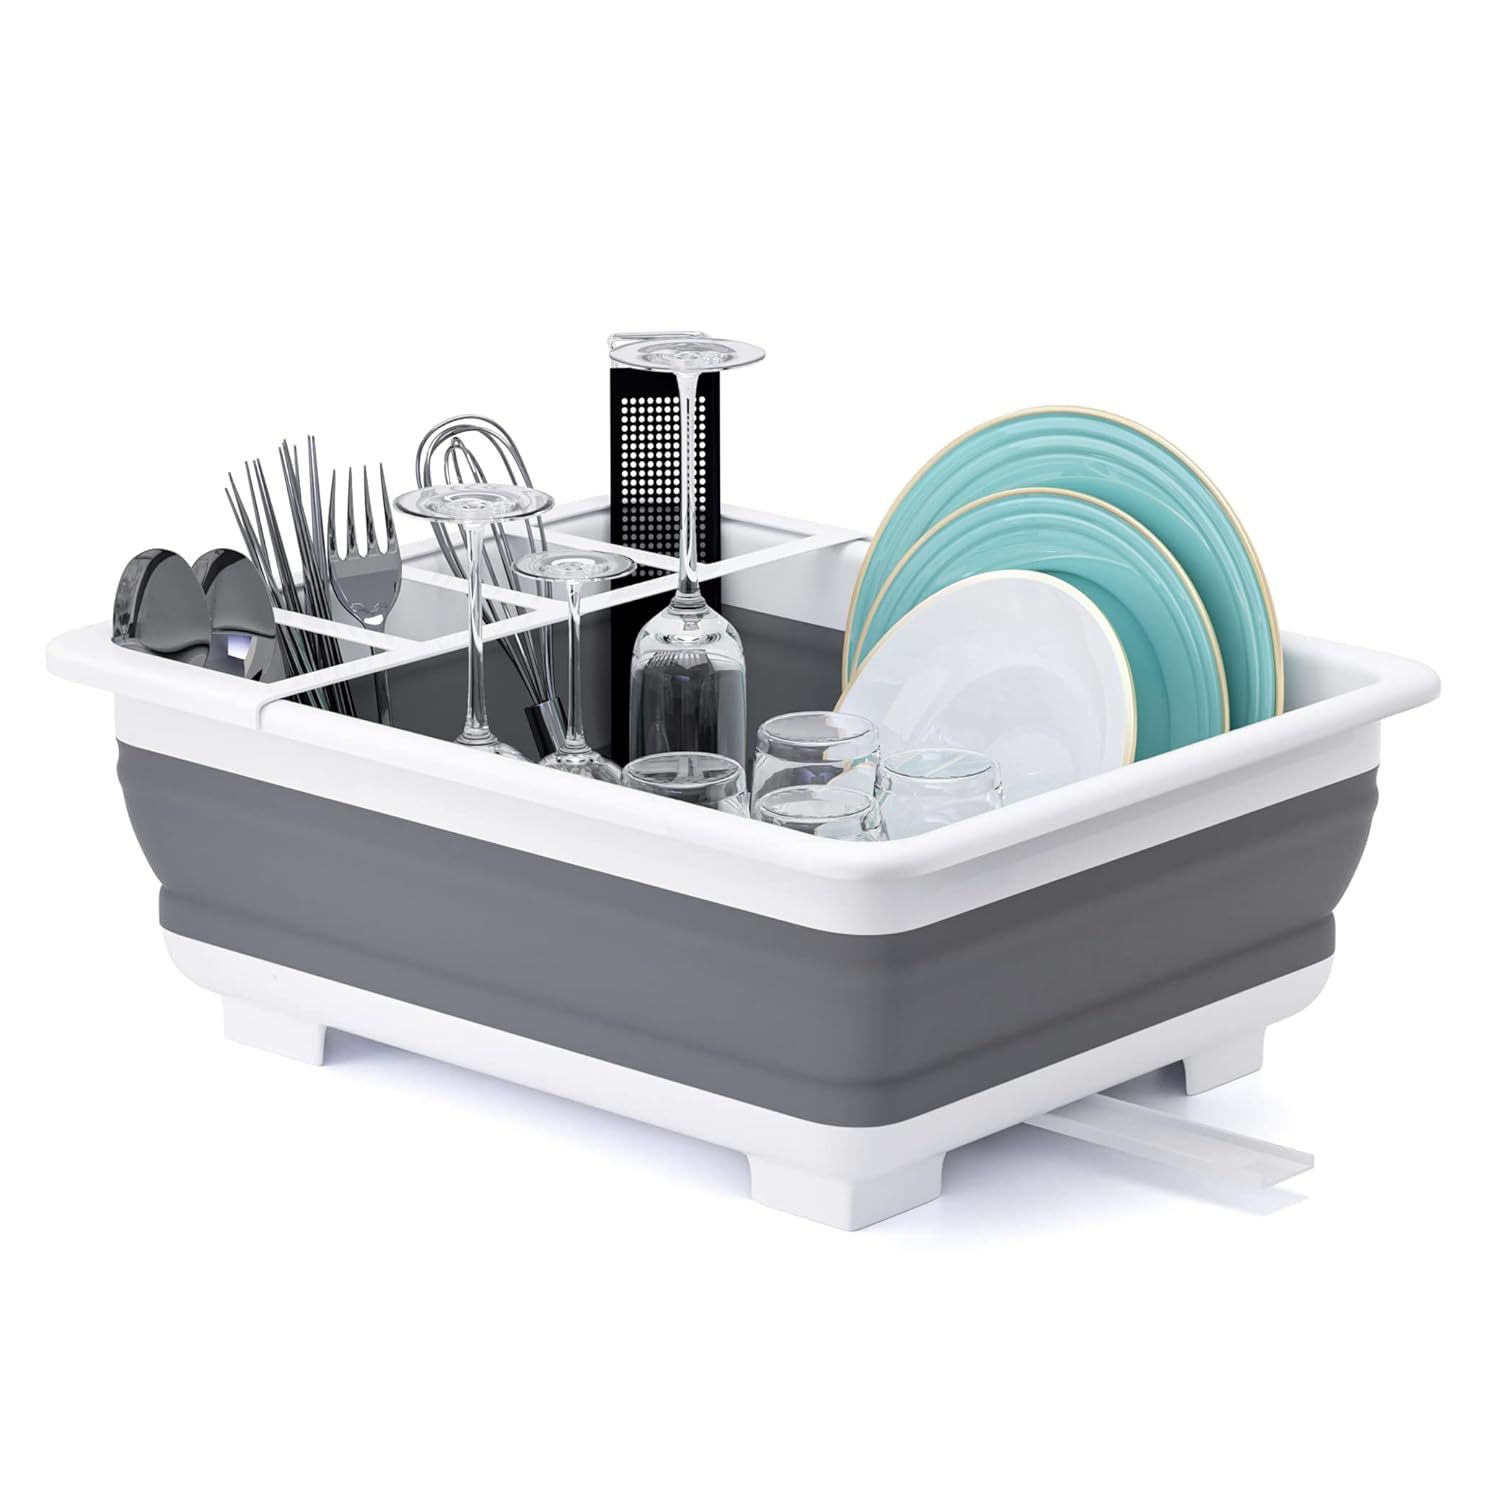 Primary image for Collapsible Dish Drying Rack Portable Dinnerware Drainer Organizer For Kitchen R